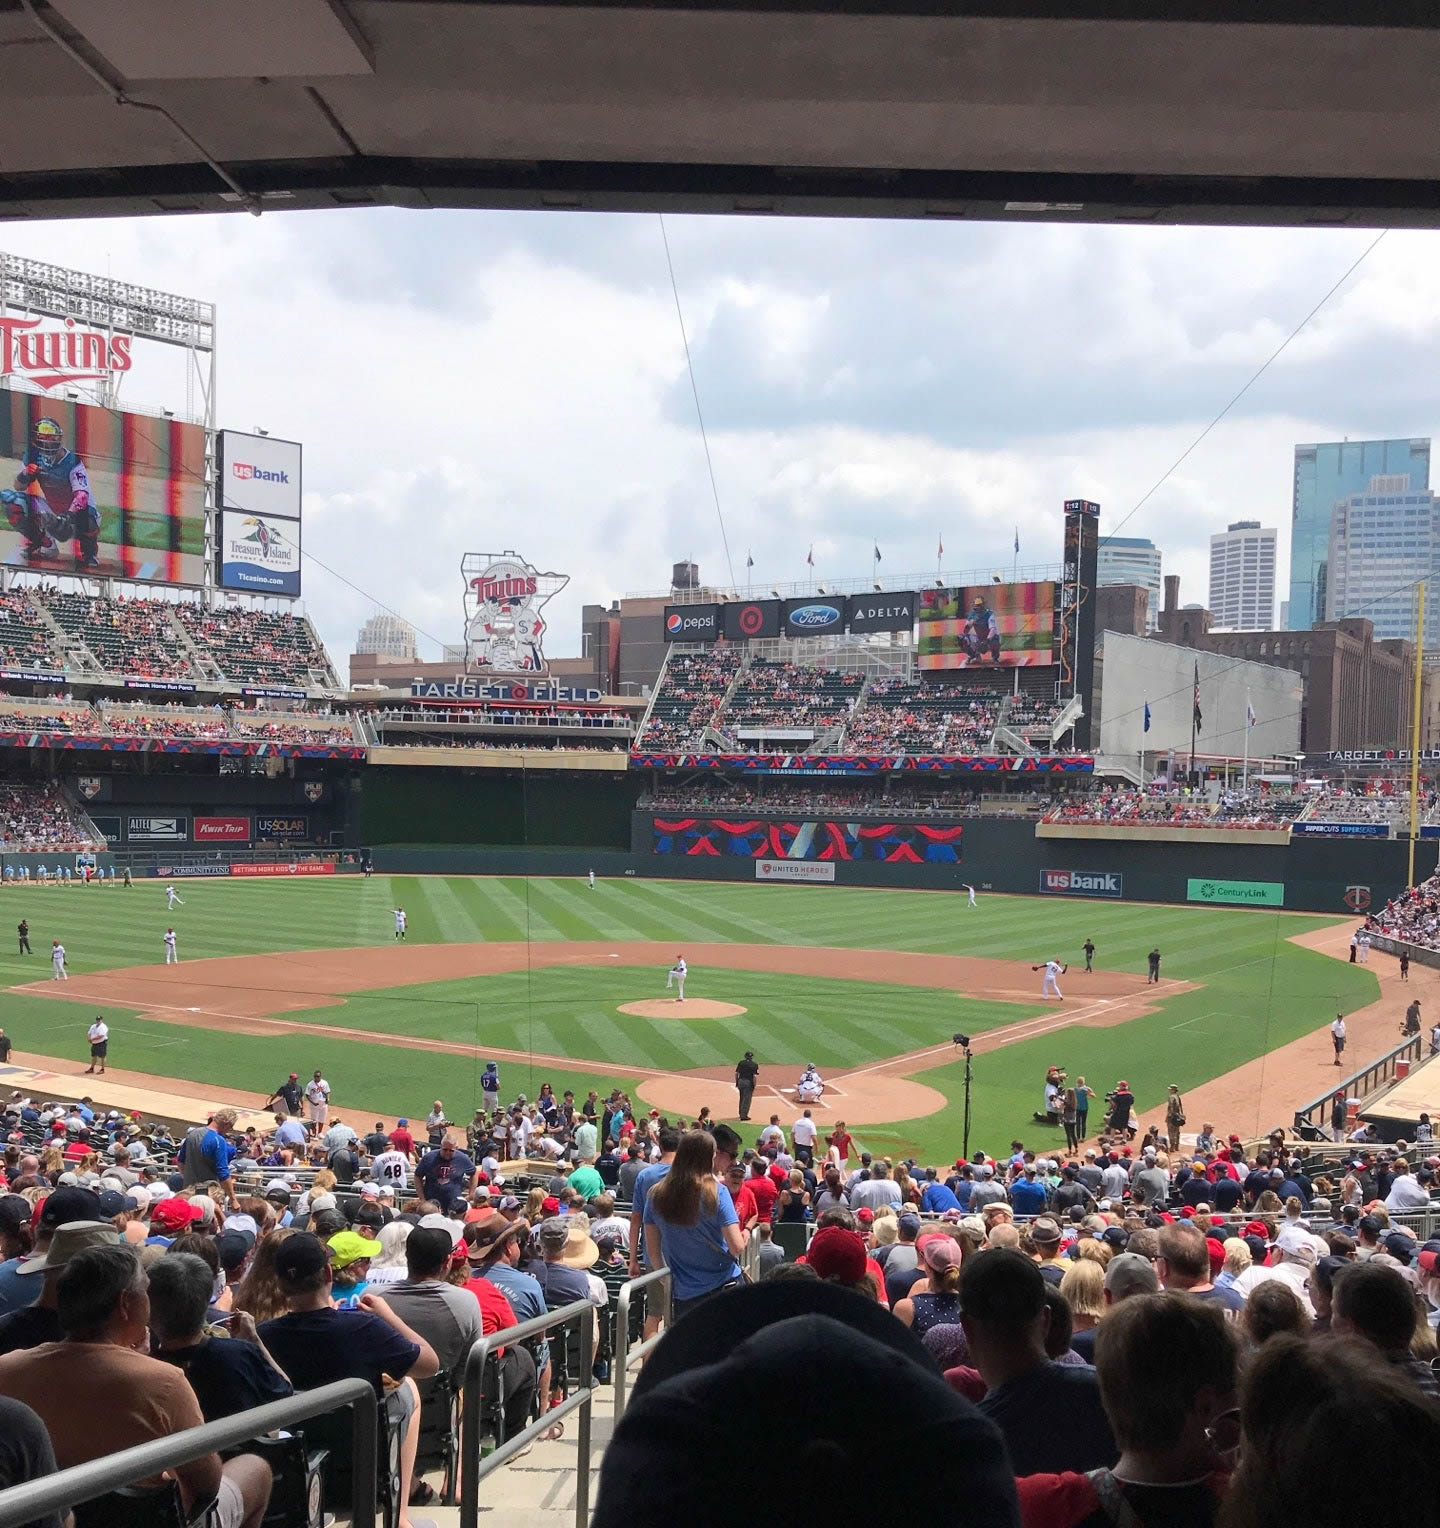 section 115, row 28 seat view  - target field